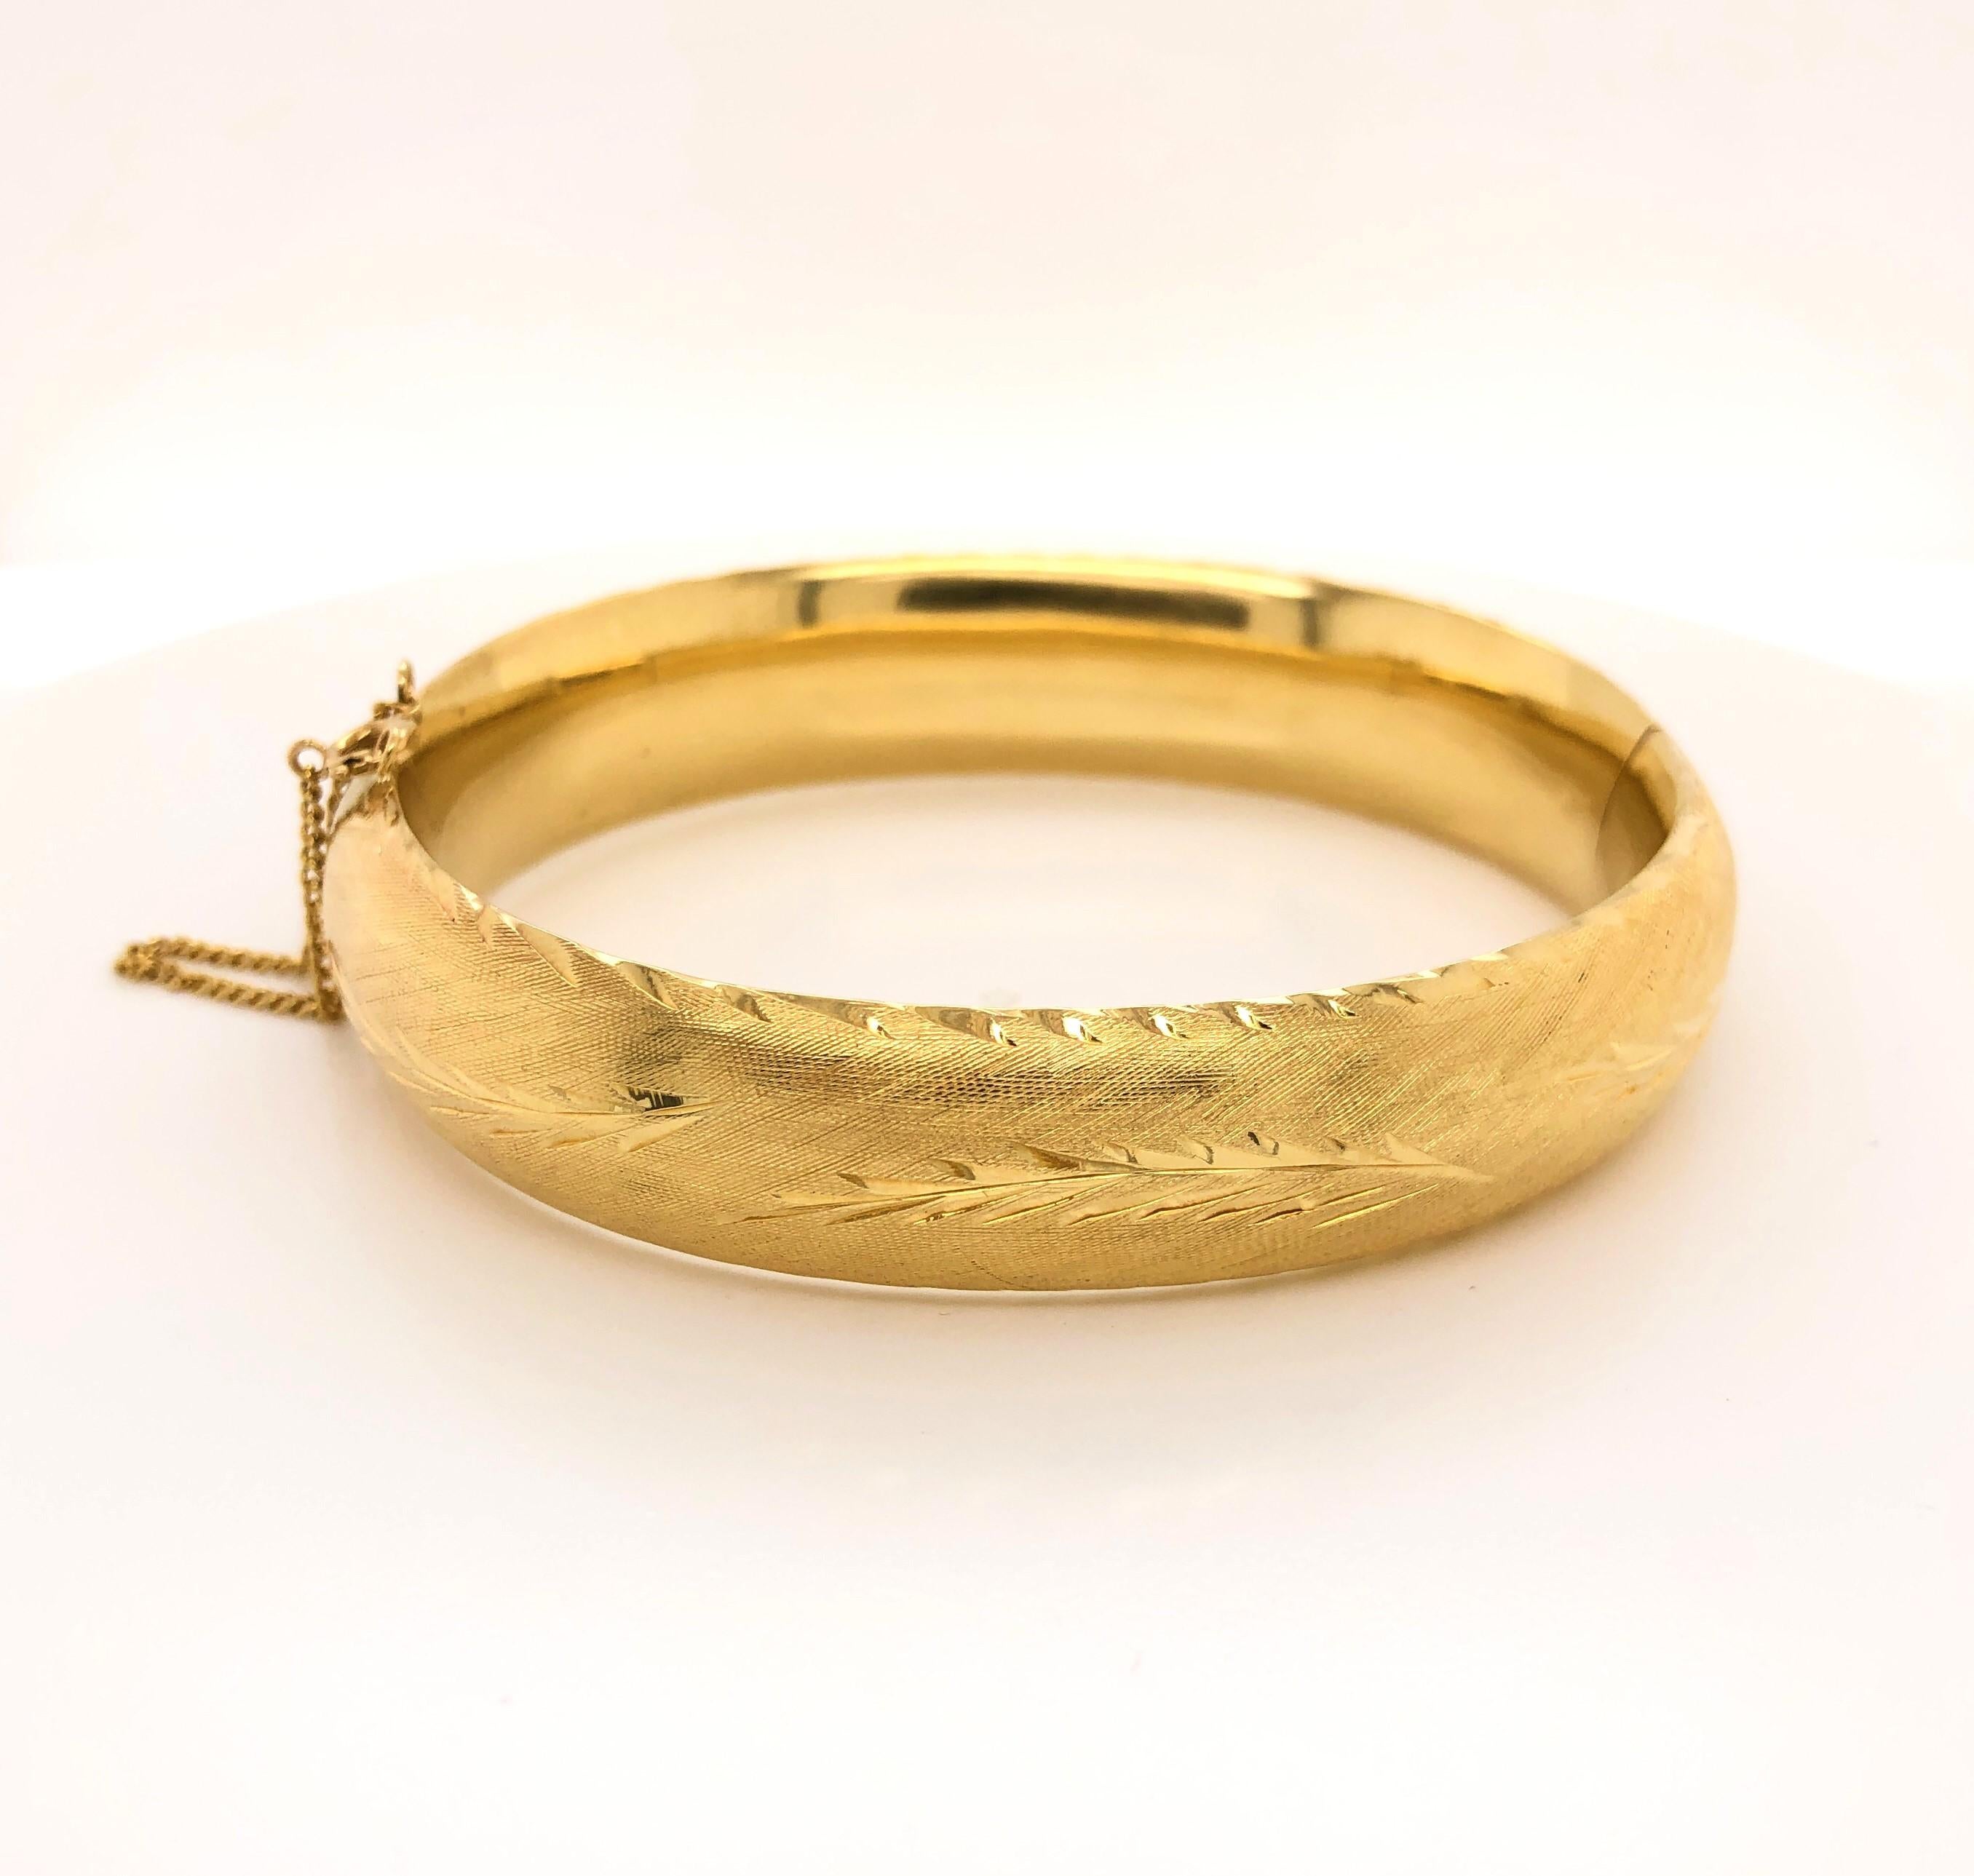 Brushed yellow gold creates an attractive textured backdrop to highlight the delicate polished gold leaf pattern and trim  that encircles this classic style bangle bracelet. Personalized script engraved on the inside band, circa 1965. In fourteen